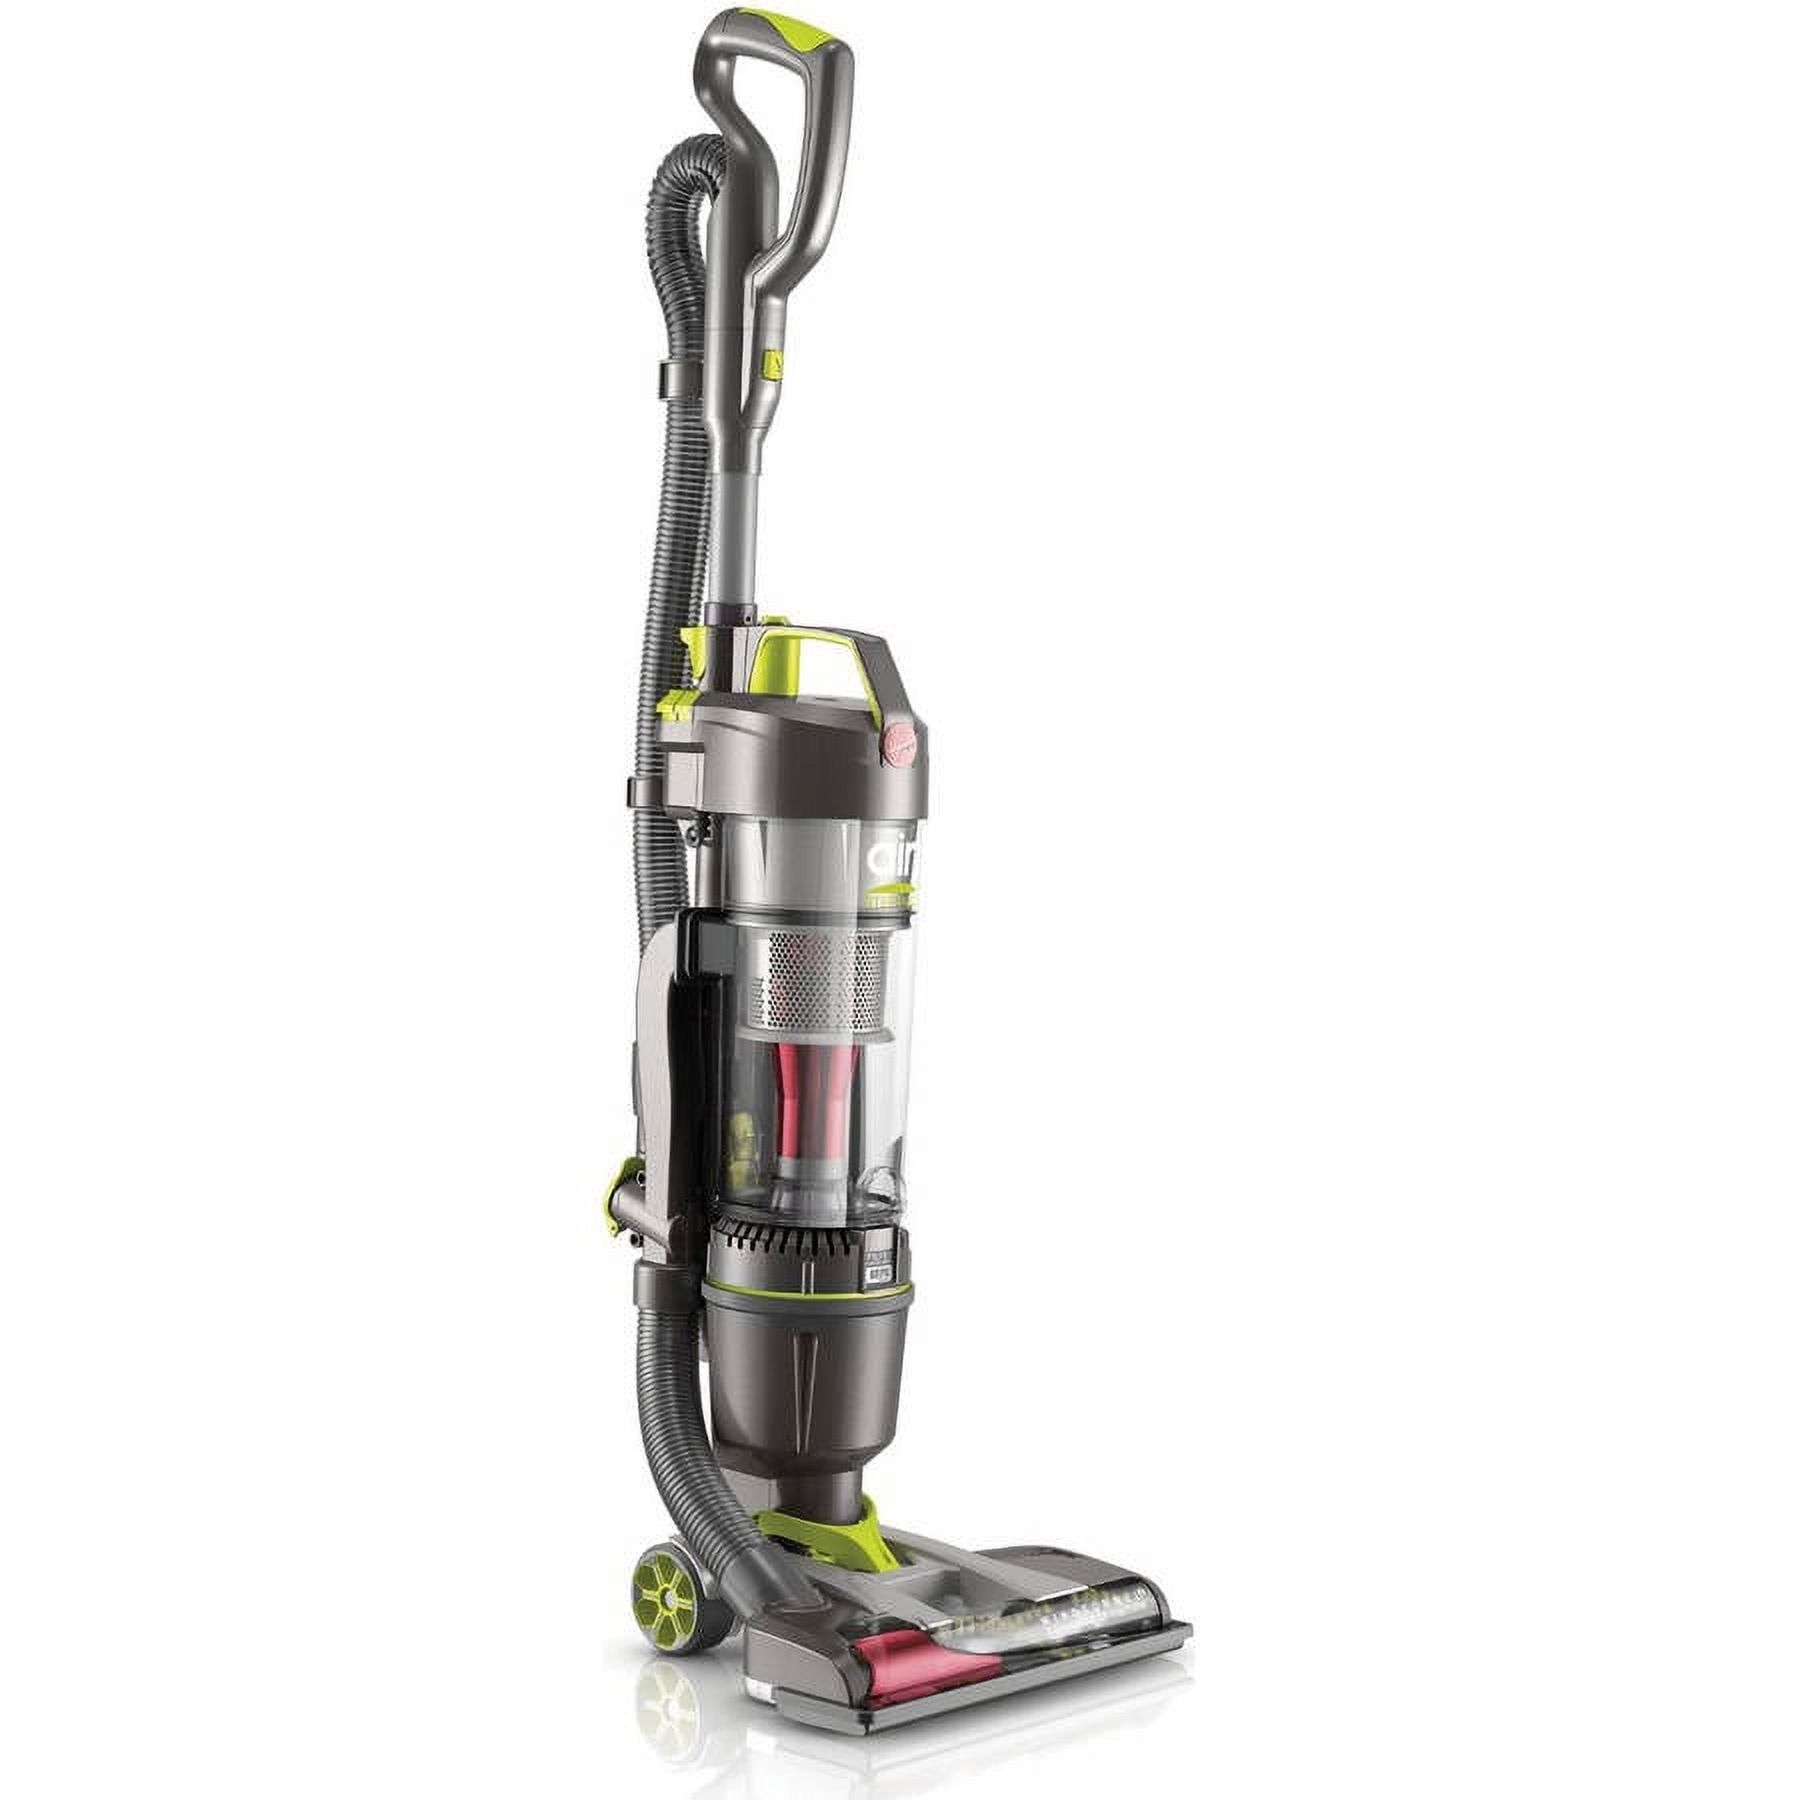 Hoover Wind Tunnel Air Steerable Pet Bagless Upright Vacuum Cleaner, UH72405PC - image 1 of 13